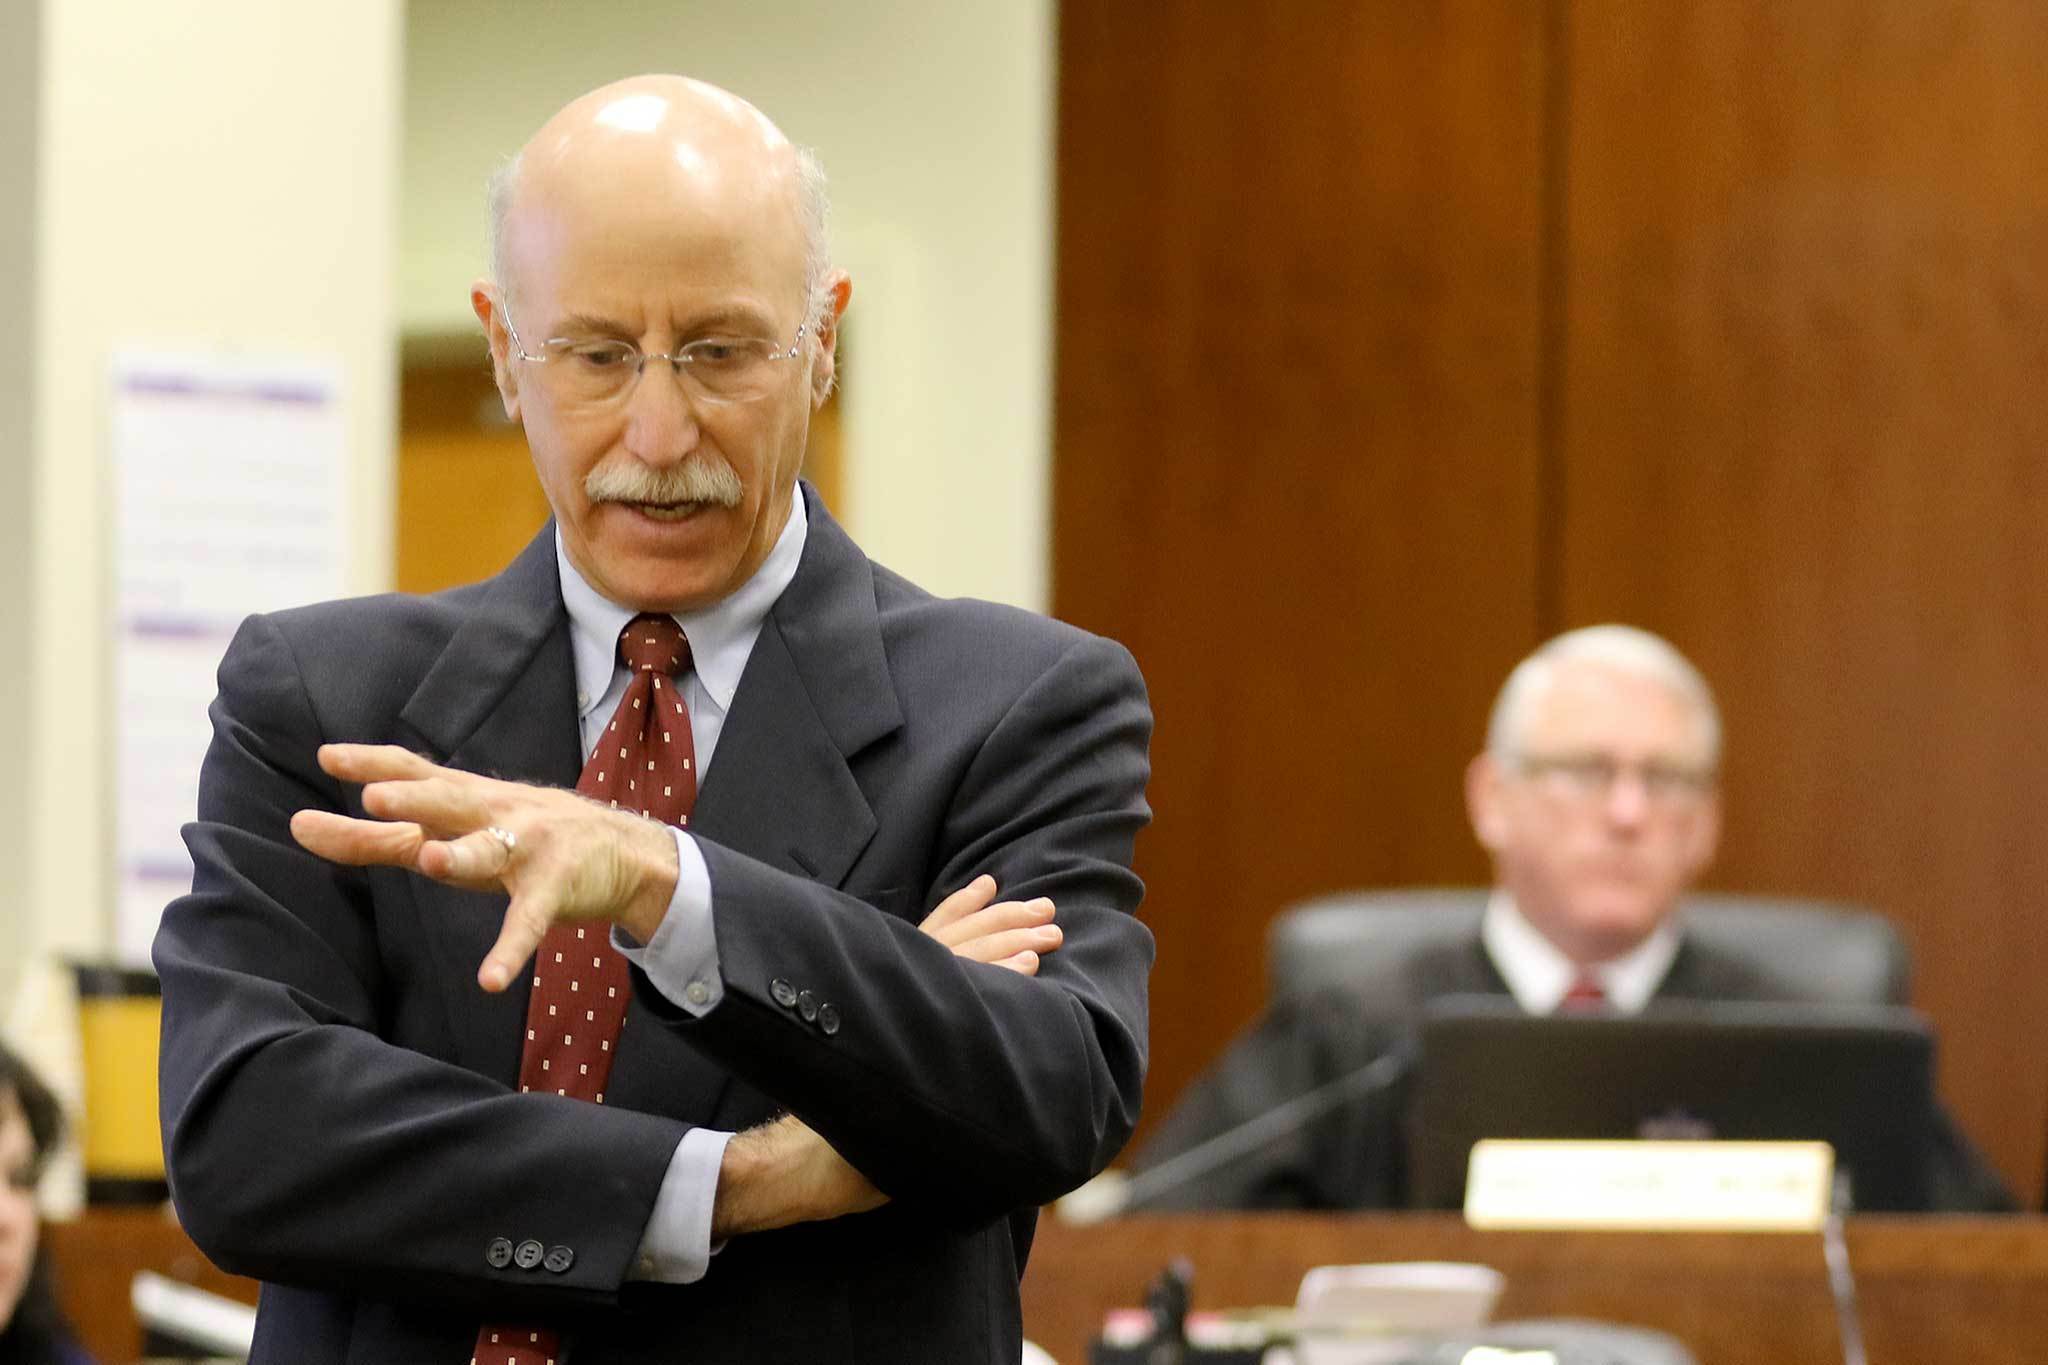 Paul Stern, Snohomish County deputy prosecutor, delivers opening statements on Feb. 24 in the trial of David Morgan, at the Snohomish County Courthouse in Everett. Morgan was ultimately convicted of beating his ex-wife and setting her on fire. (Kevin Clark / The Herald)